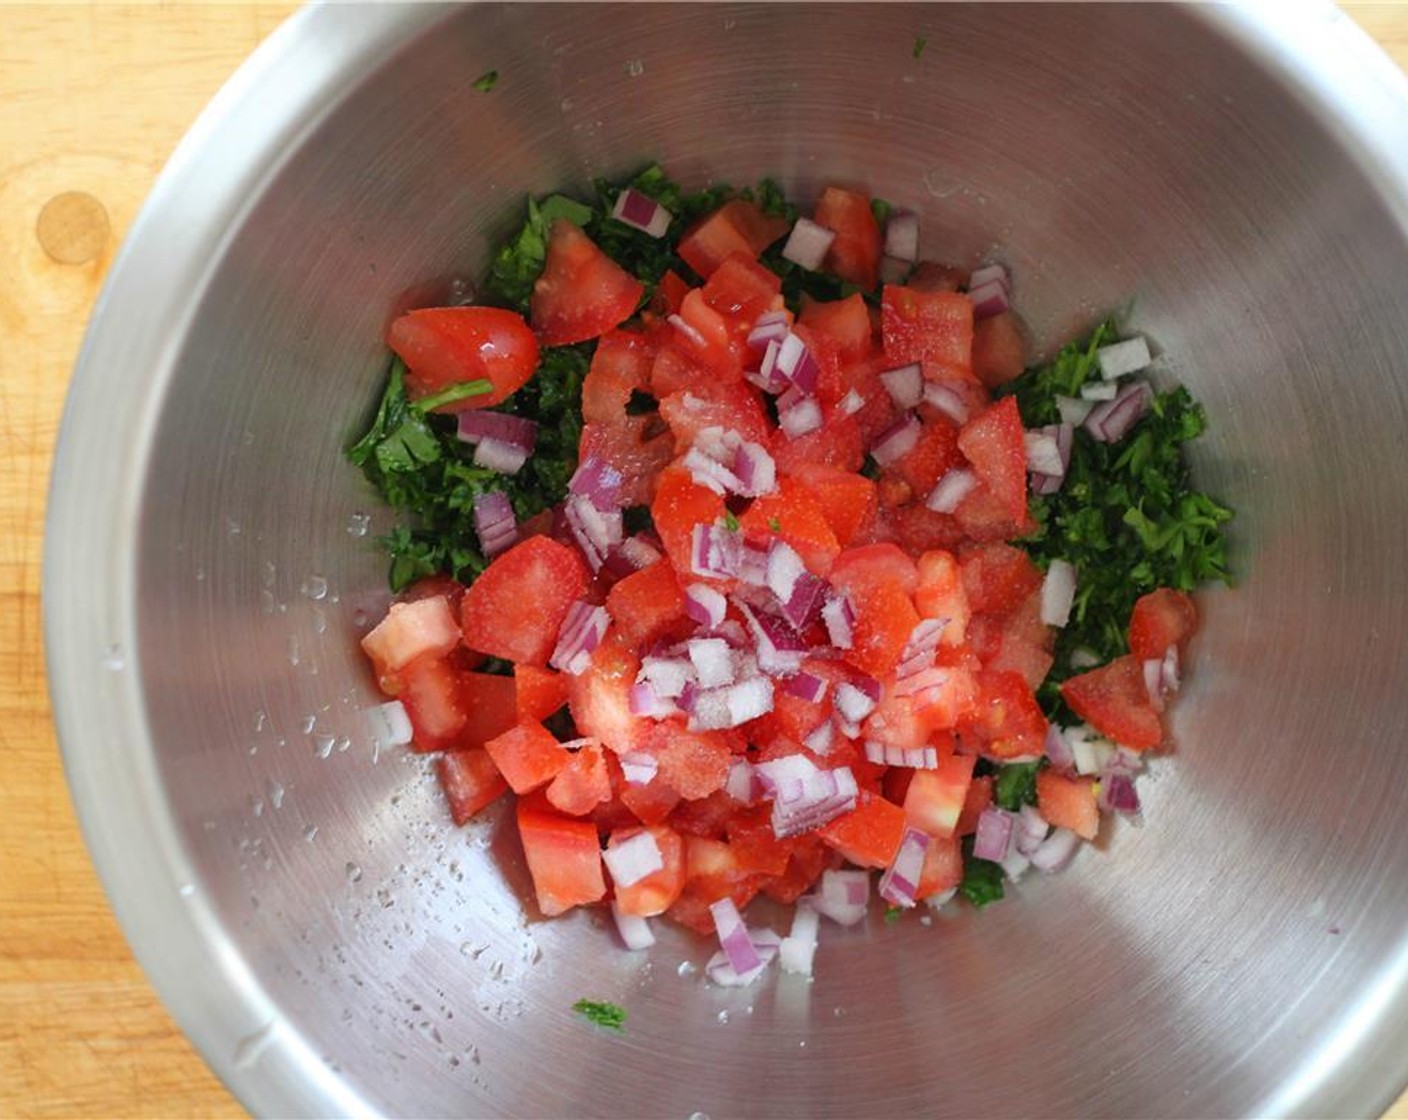 step 6 For the Quick Tabbouleh Salad, prepare the ingredients. Place the Tomato (1), Red Onion (1 Tbsp), and Fresh Parsley (1 cup) in a bowl and simply toss them together. Season with Salt (to taste) Ground Black Pepper (to taste).